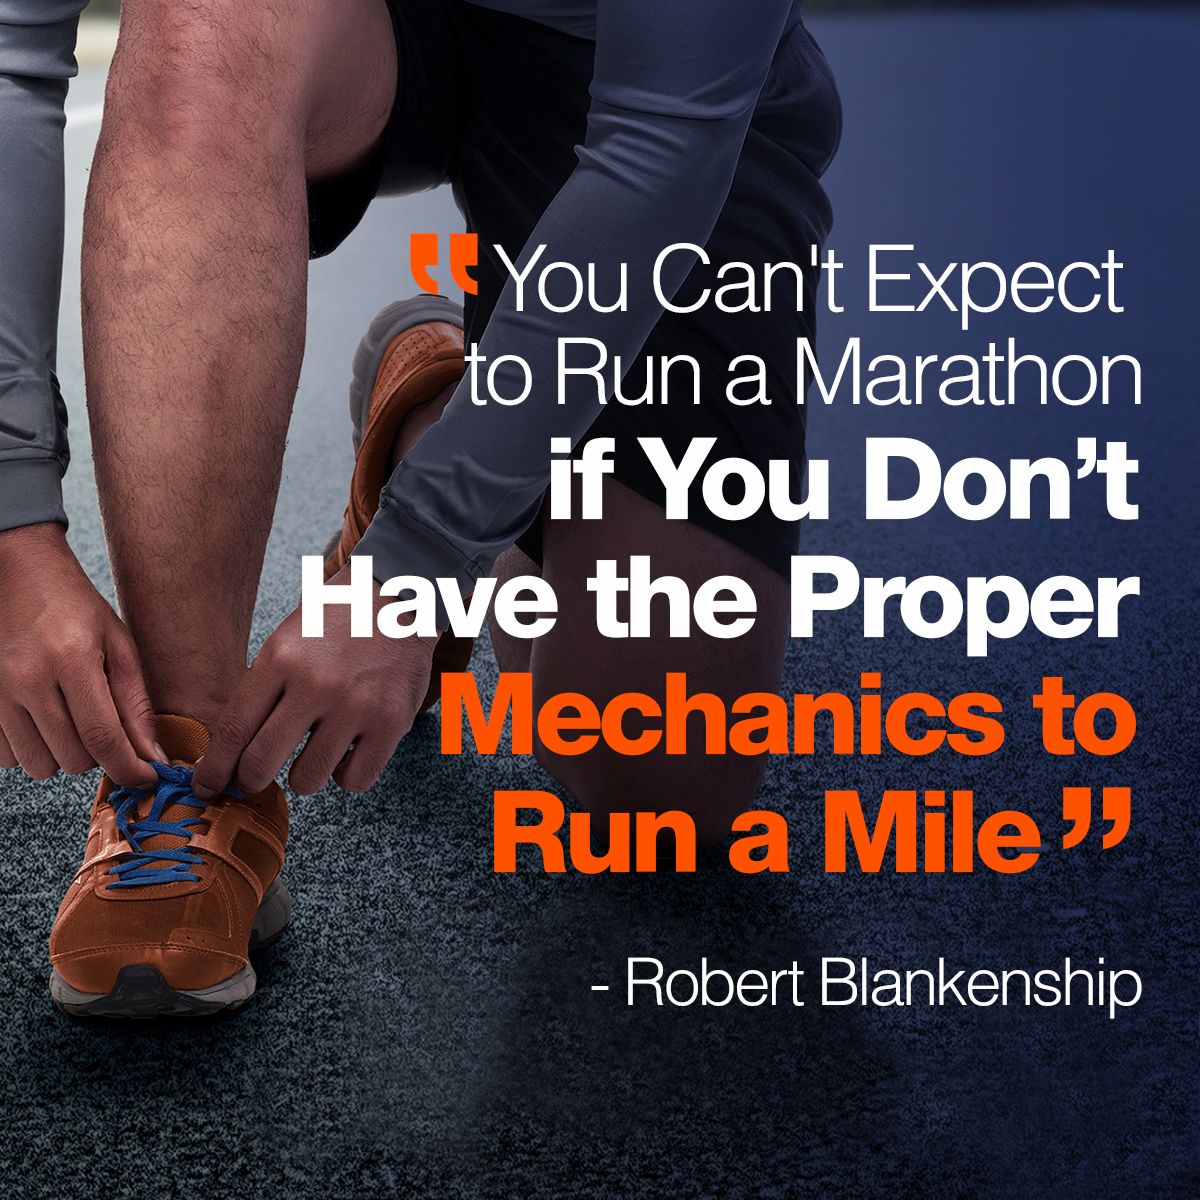 You Can't Expect To Run a Marathon if You Don't Have the Proper Mechanics To Run a Mile - Robert Blankenship